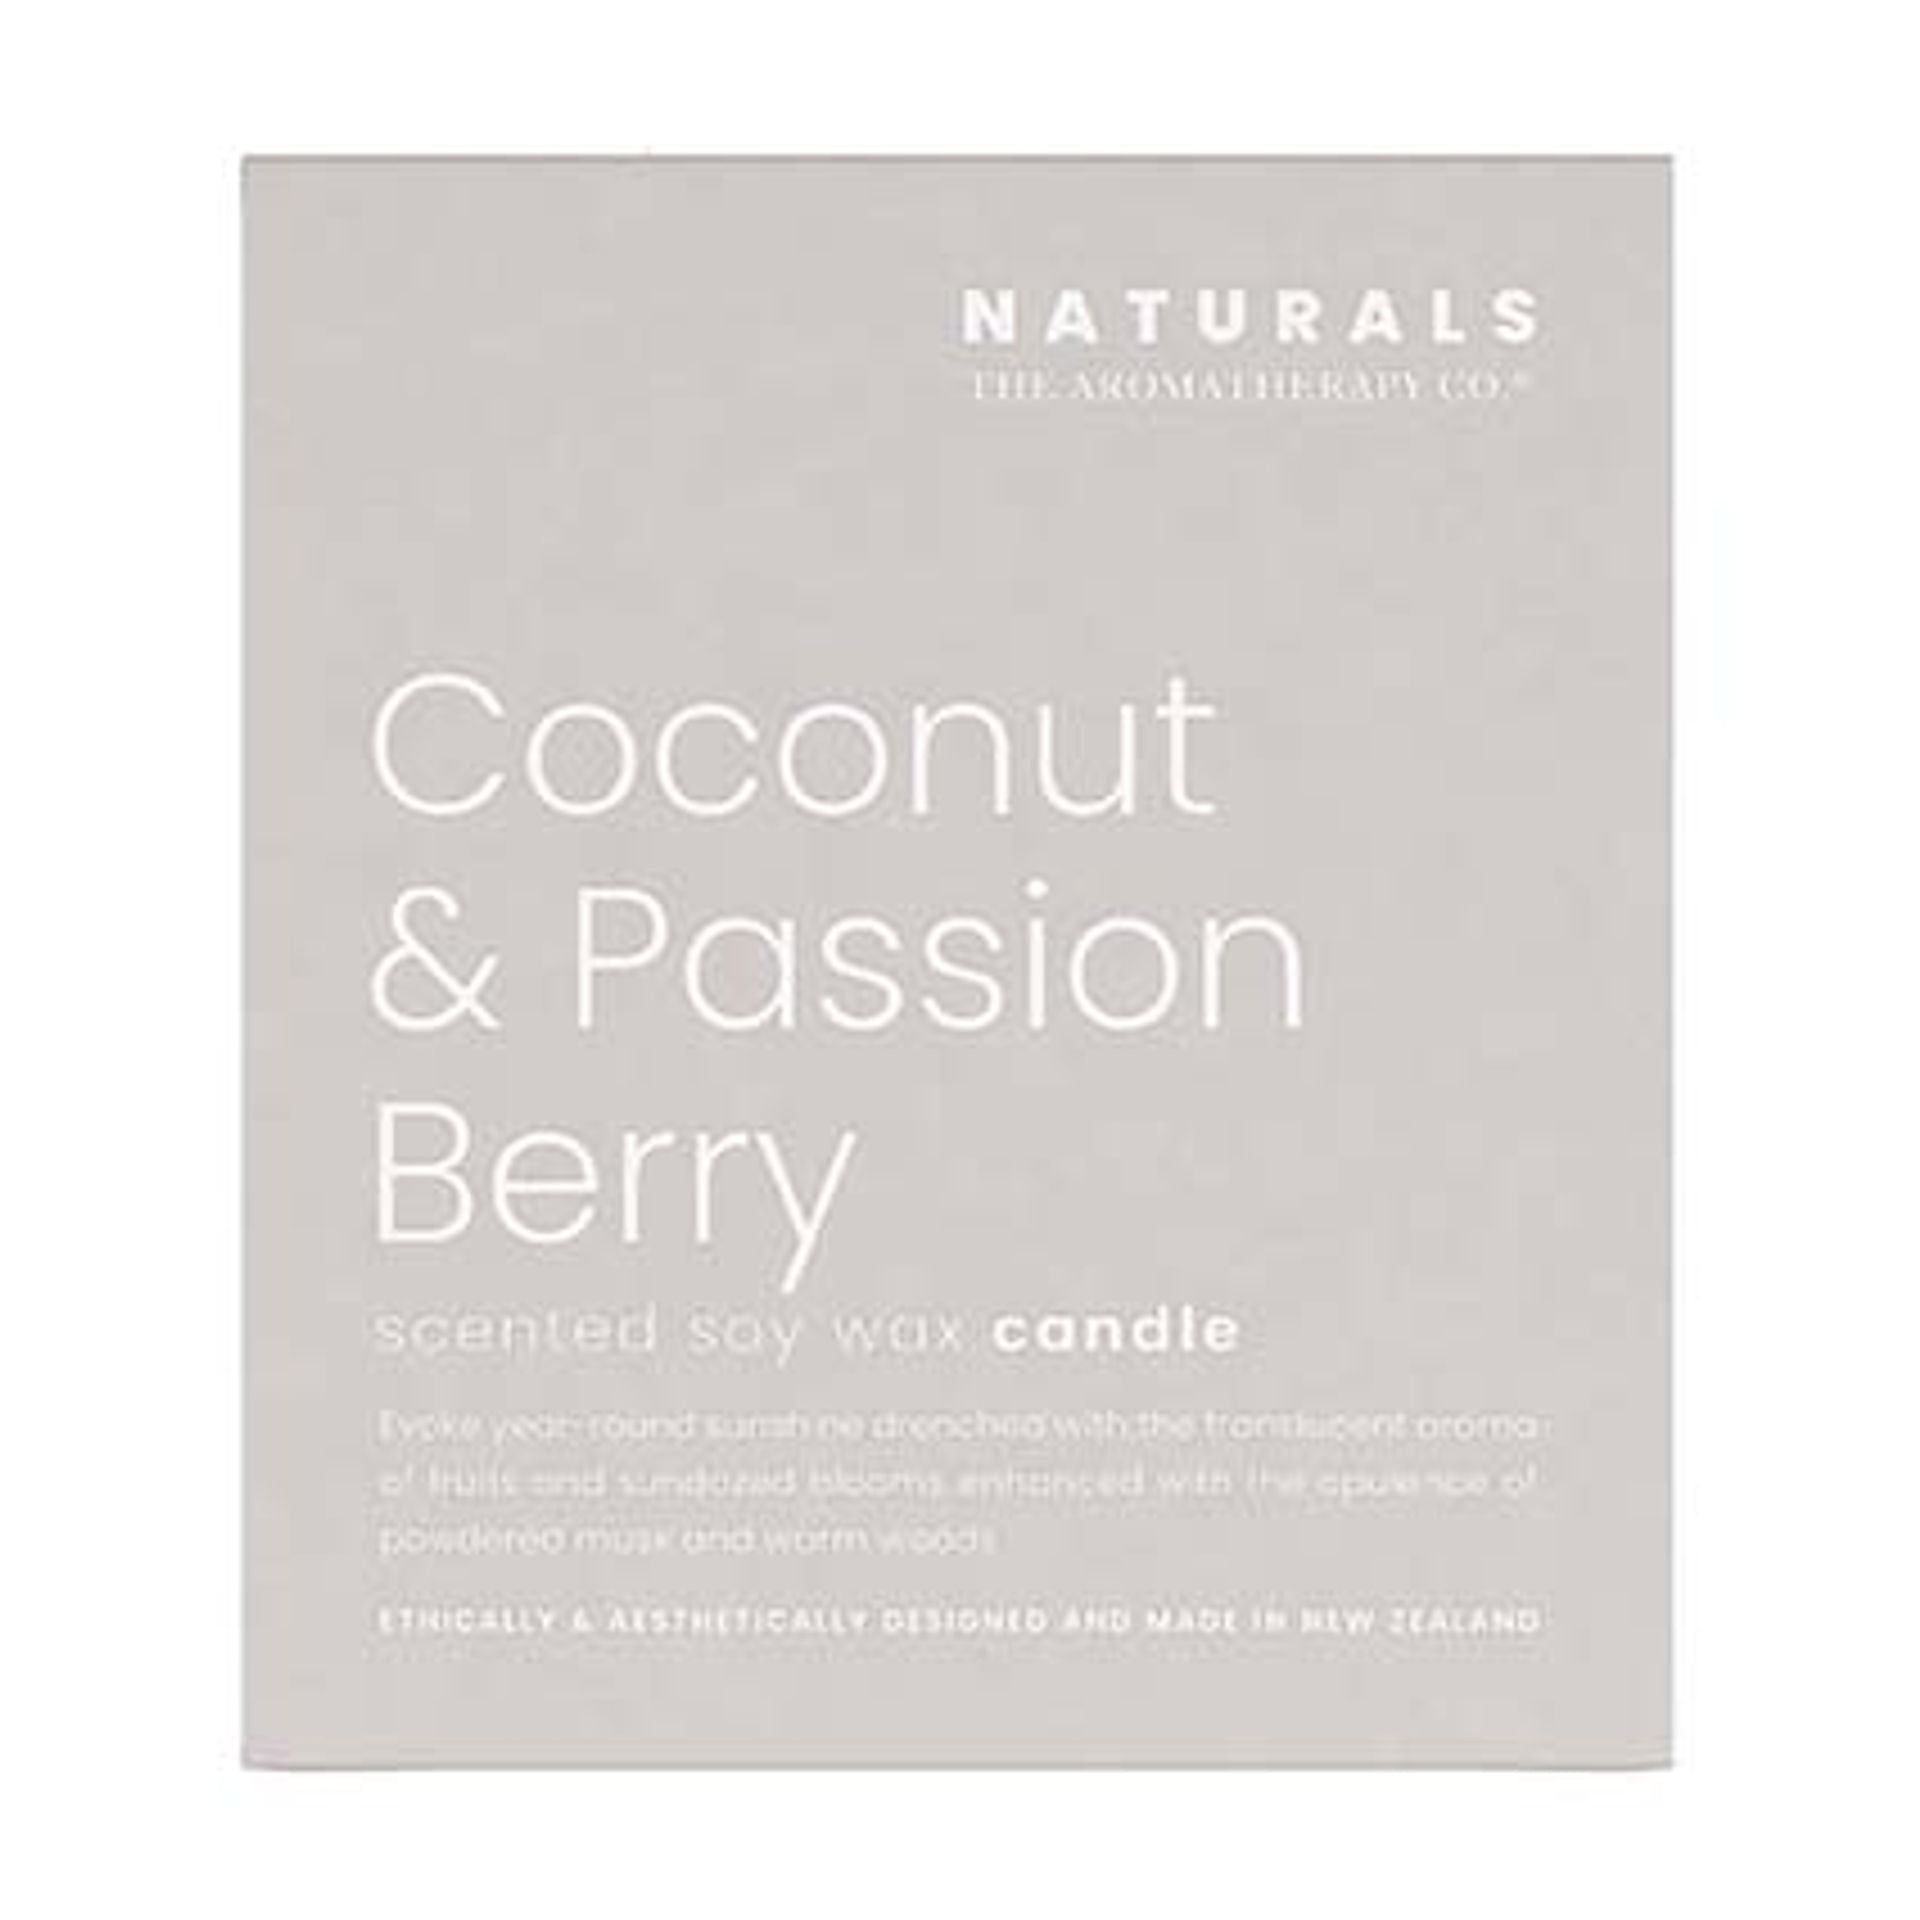 The Aromatherapy Co Naturals Coconut & Passion Berry Candle